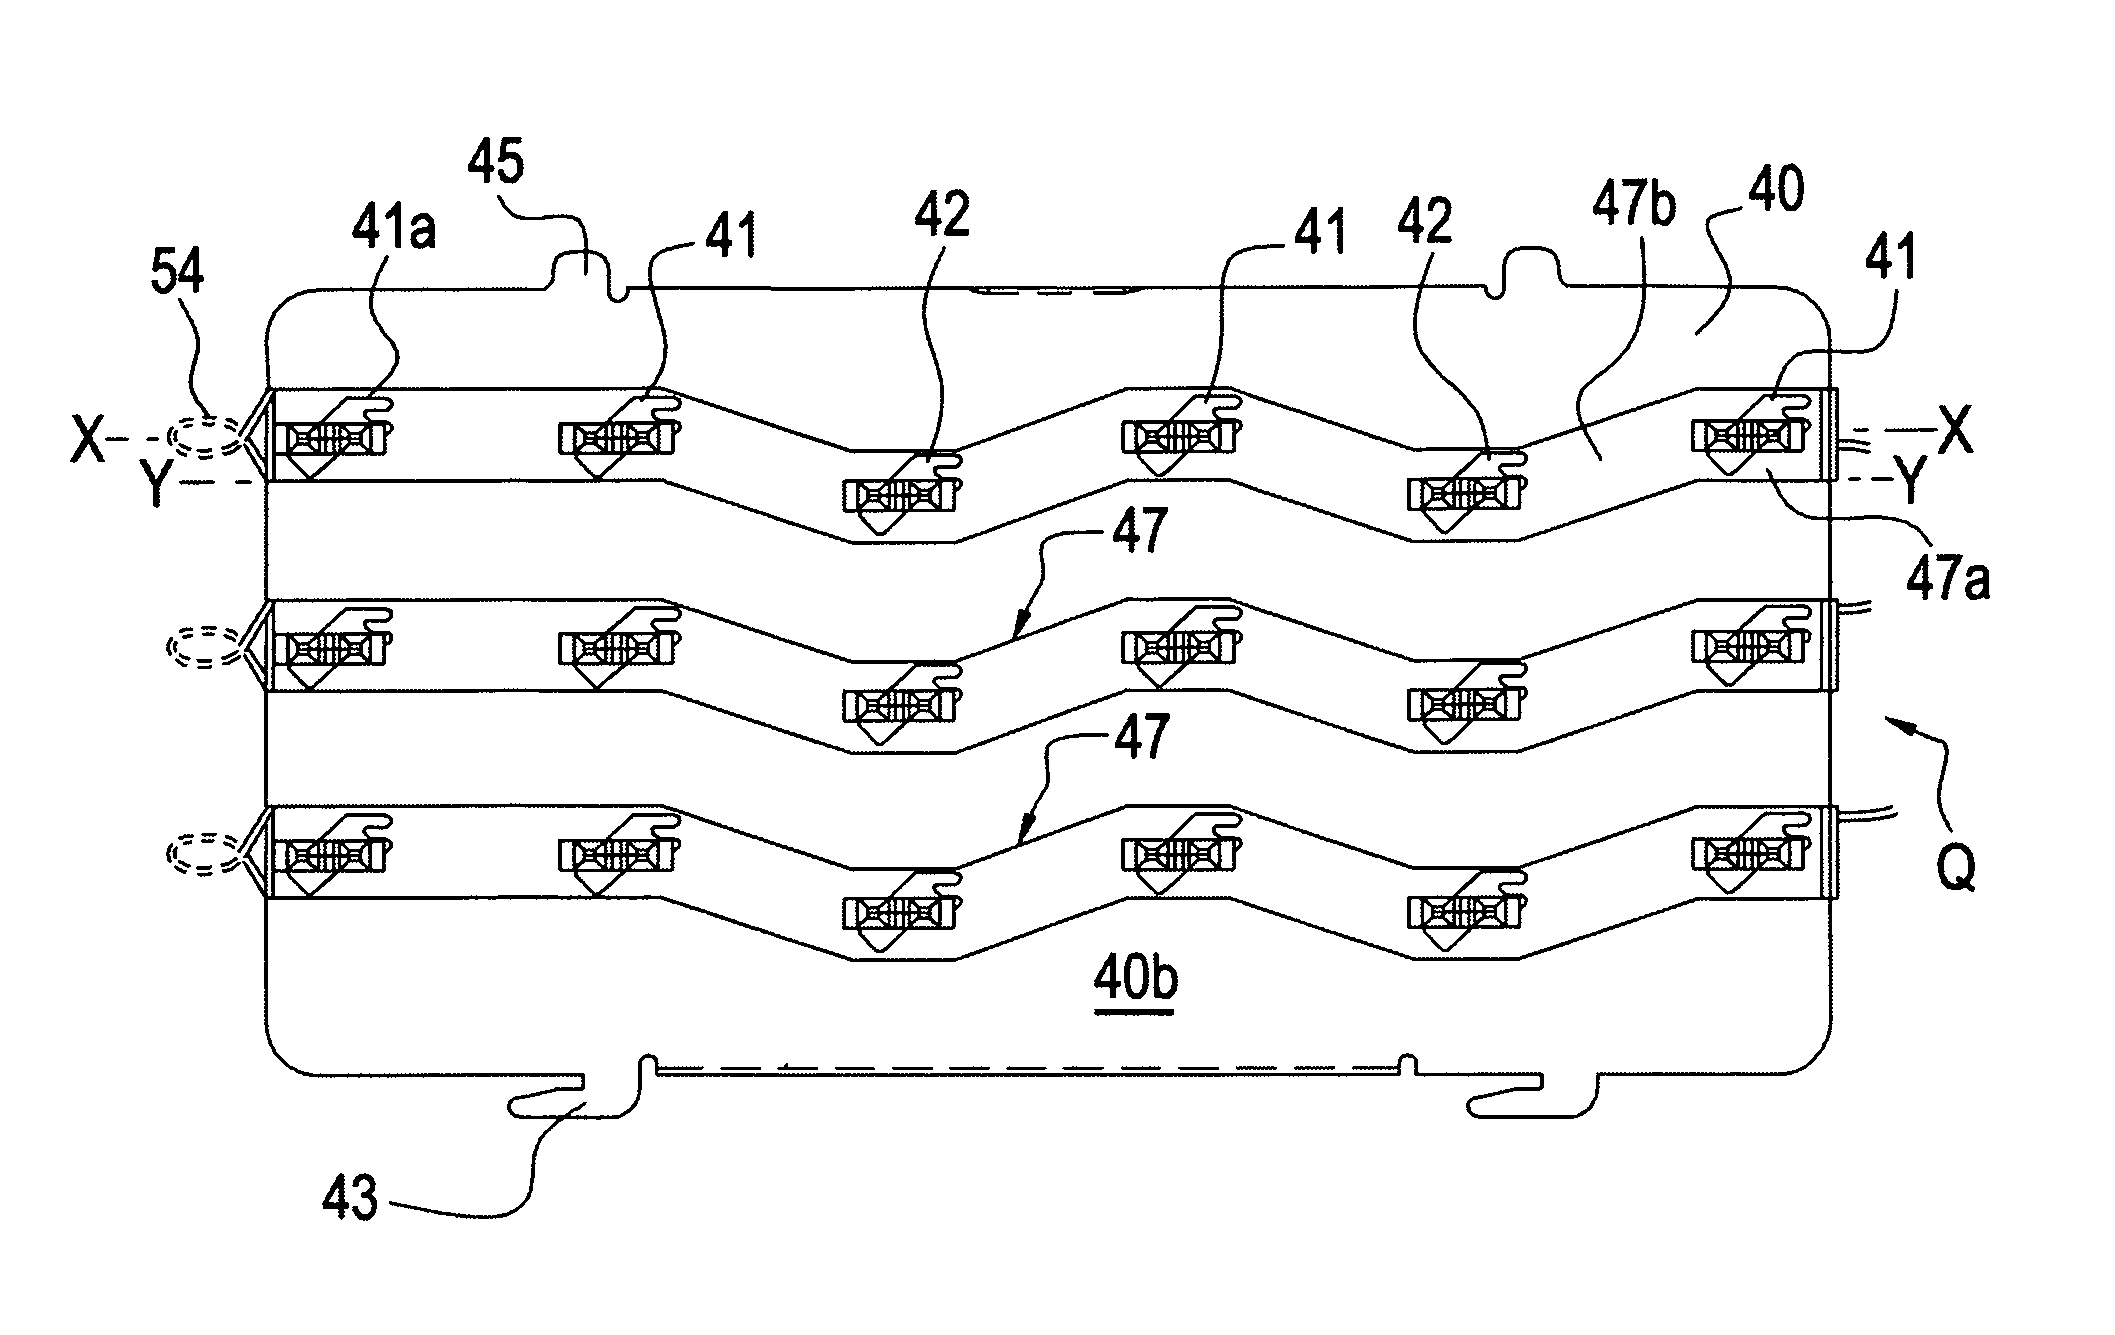 Open coil electric resistance heater with offset coil support and method of use